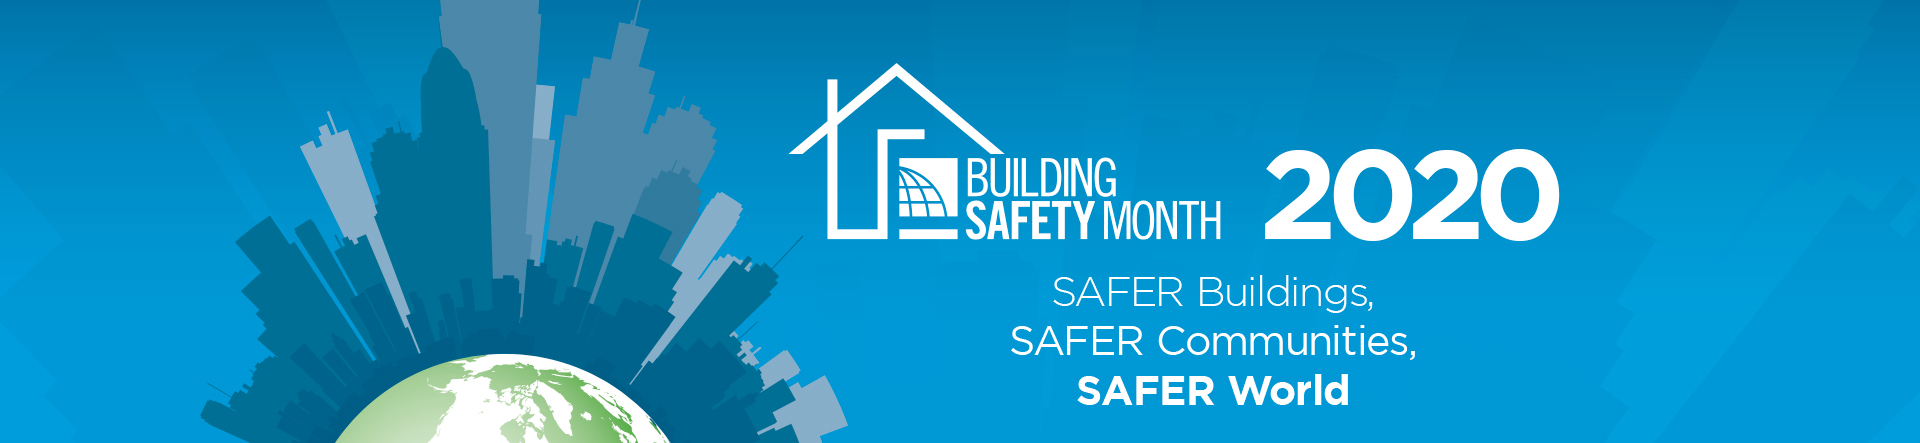 Building Safety Month News & Events